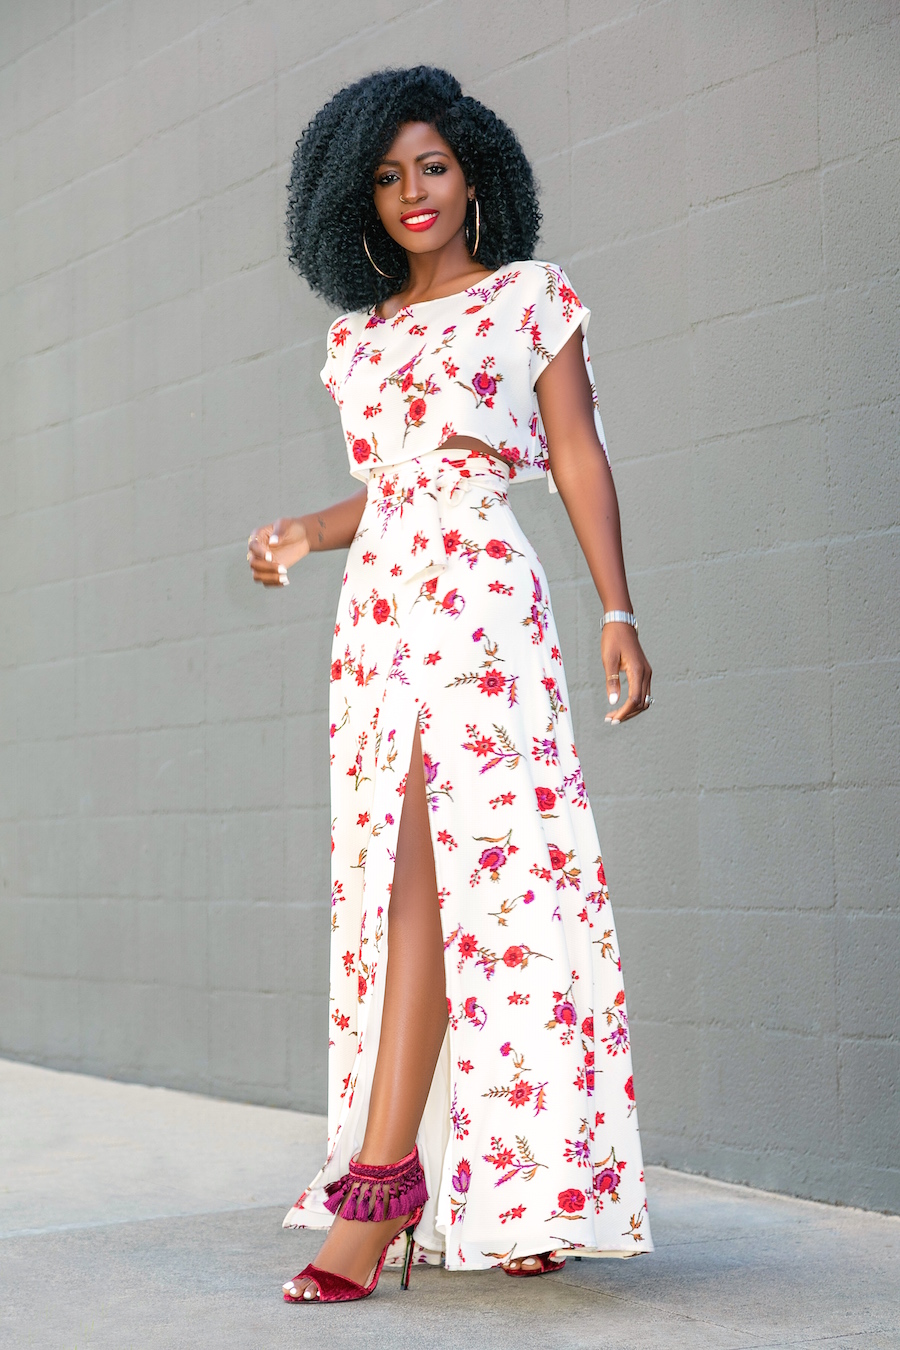 Style Pantry | Floral Crop Top + Floral High Waist Skirt